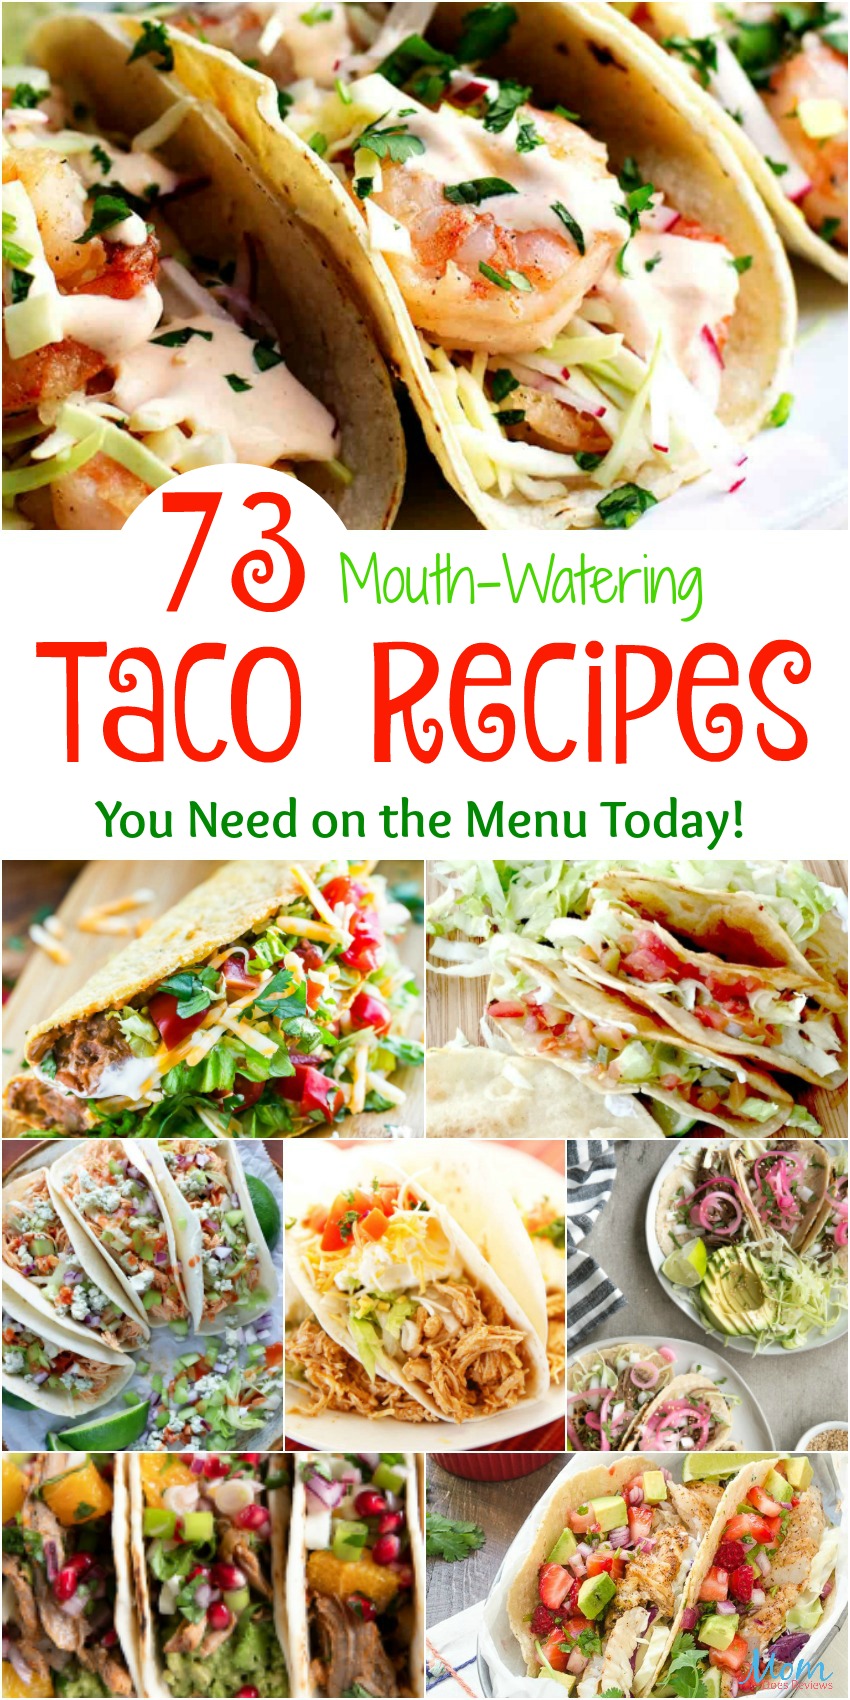 73 Mouth-Watering Taco Recipes You Need on the Menu Today #recipes #taco #tacotuesday #funfood #getinmybelly